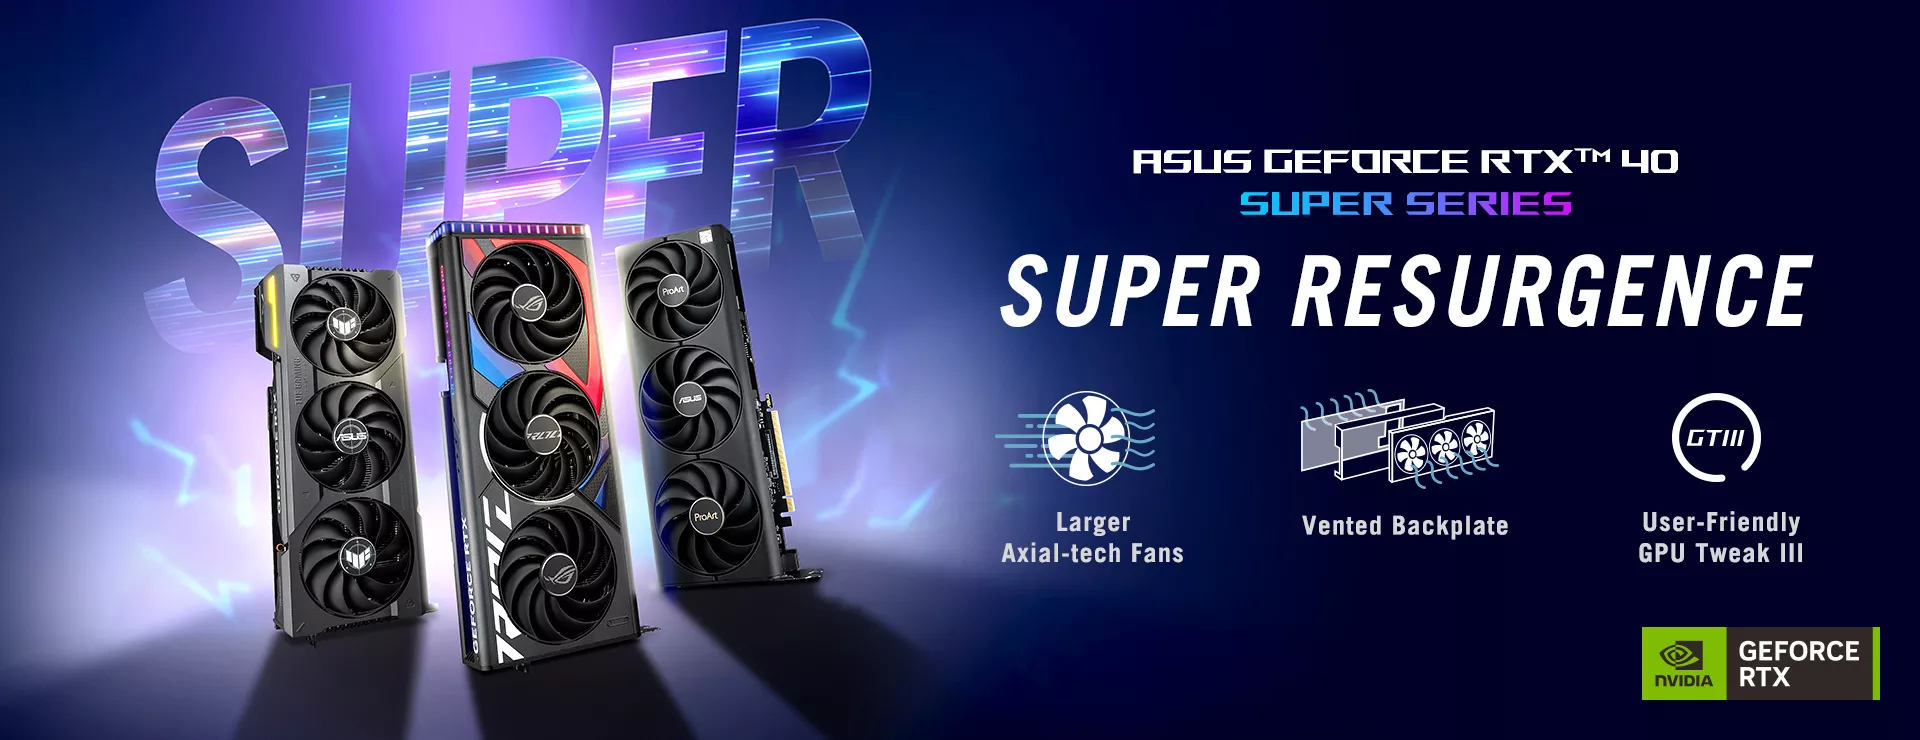 VGA RTX 40 SUPER Series banner with ROG Strix, TUF Gaming and ProArt graphics card  Image alt: ROG Strix, TUF Gaming and ProArt RTX 40 SUPER Series graphics cards with NVIDIA GeForce RTX logo